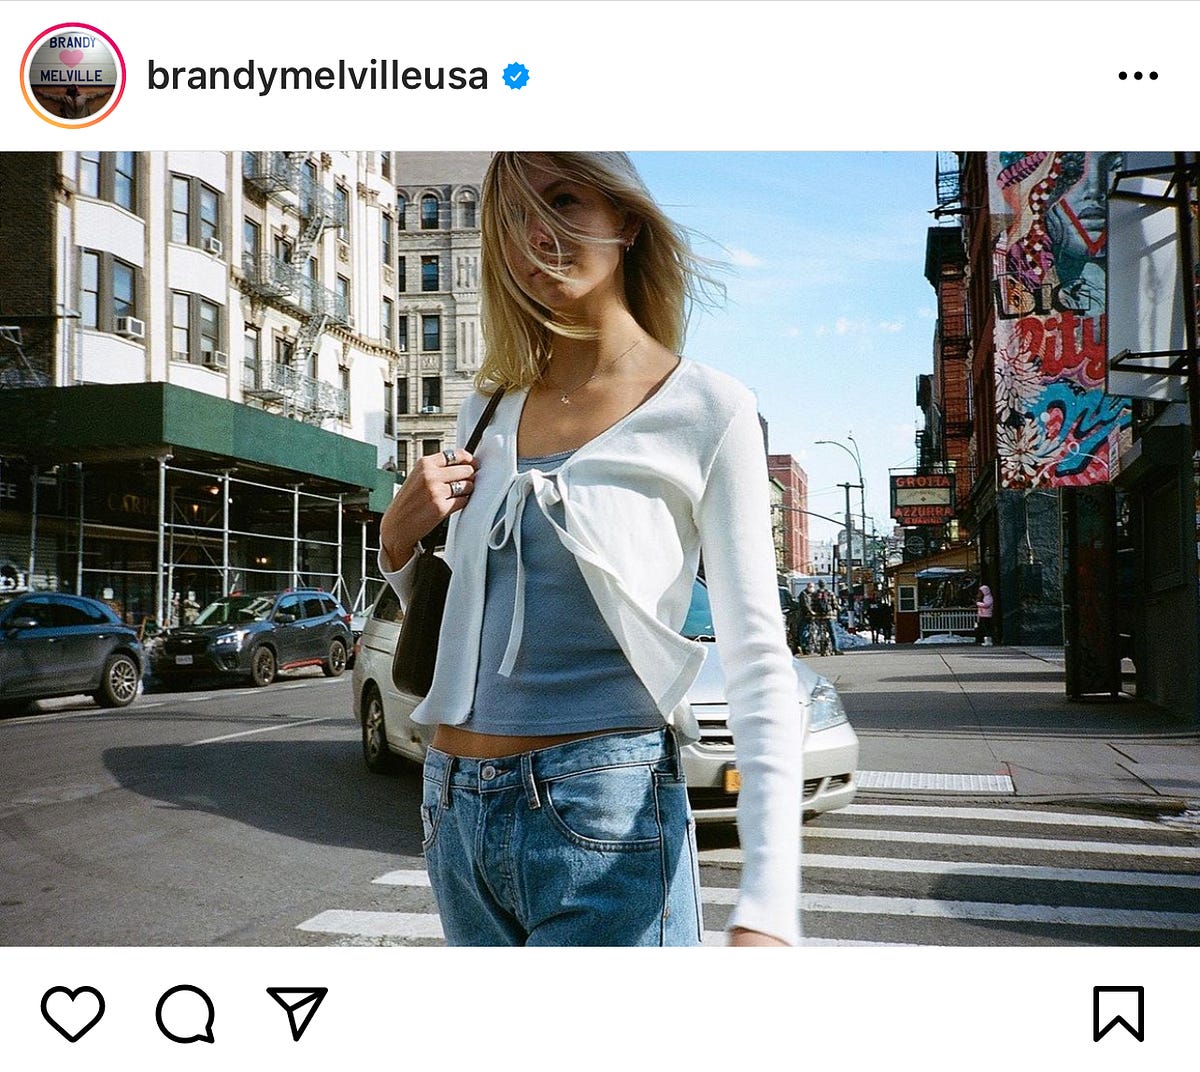 Brandy Melville Apparel Brand Launches Store on Fifth Avenue South